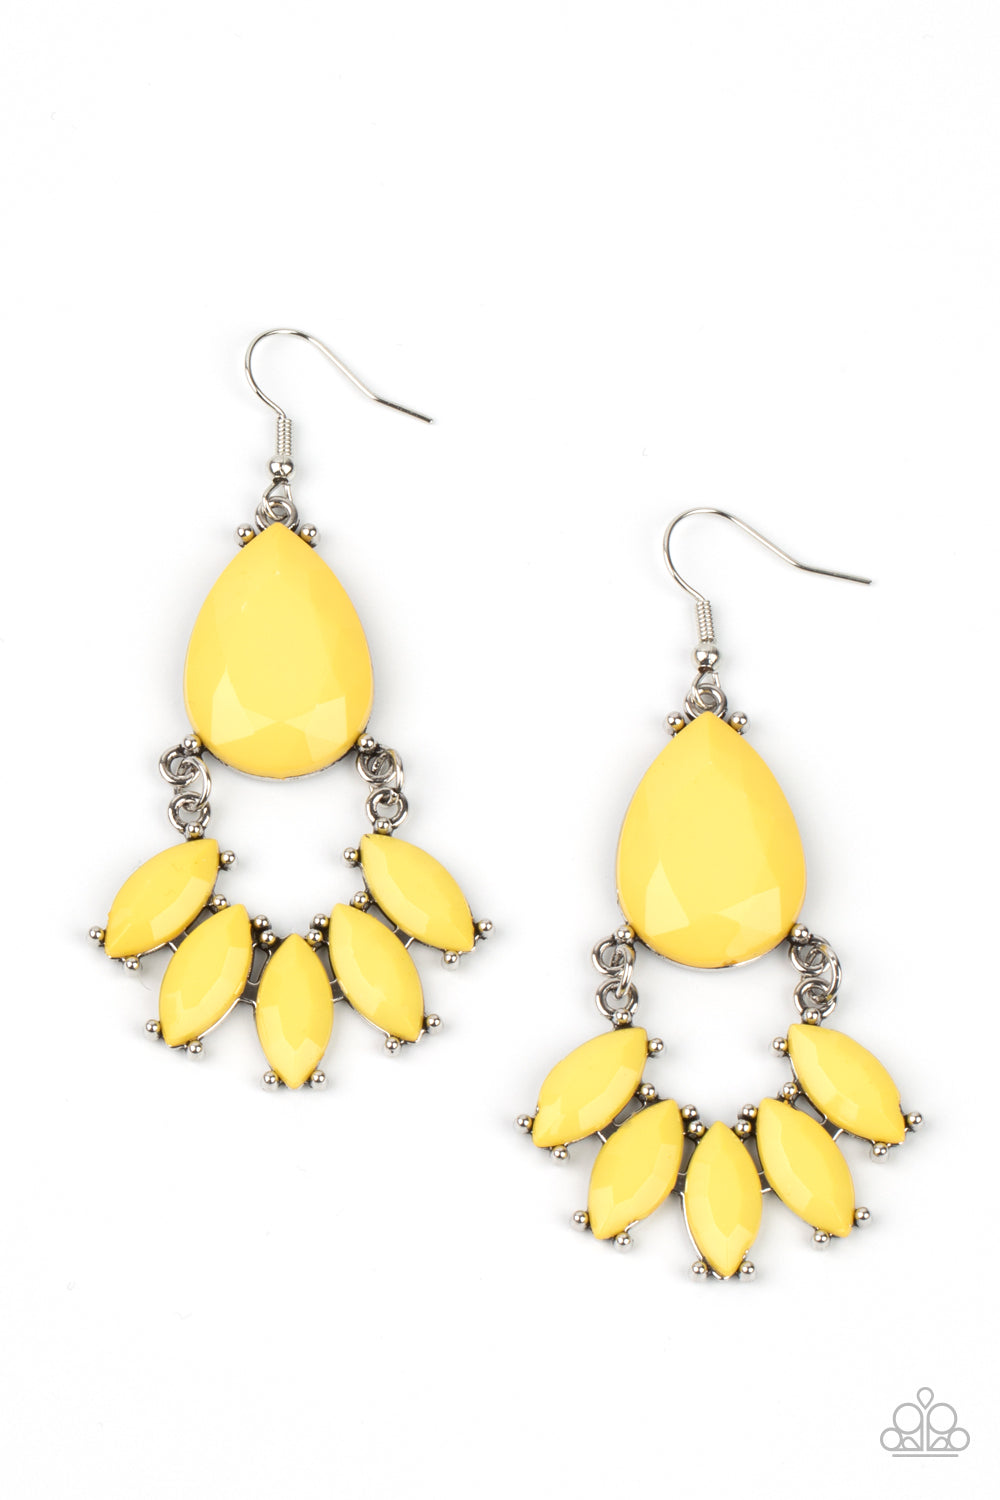 POWERHOUSE Call Yellow Earring - Paparazzi Accessories.  A curved row of marquise cut Illuminating beads attaches to the bottom of a dramatically oversized teardrop Illuminating bead, coalescing into a glamorous lure. Earring attaches to a standard fishhook fitting.  ﻿﻿﻿All Paparazzi Accessories are lead free and nickel free!  Sold as one pair of earrings.